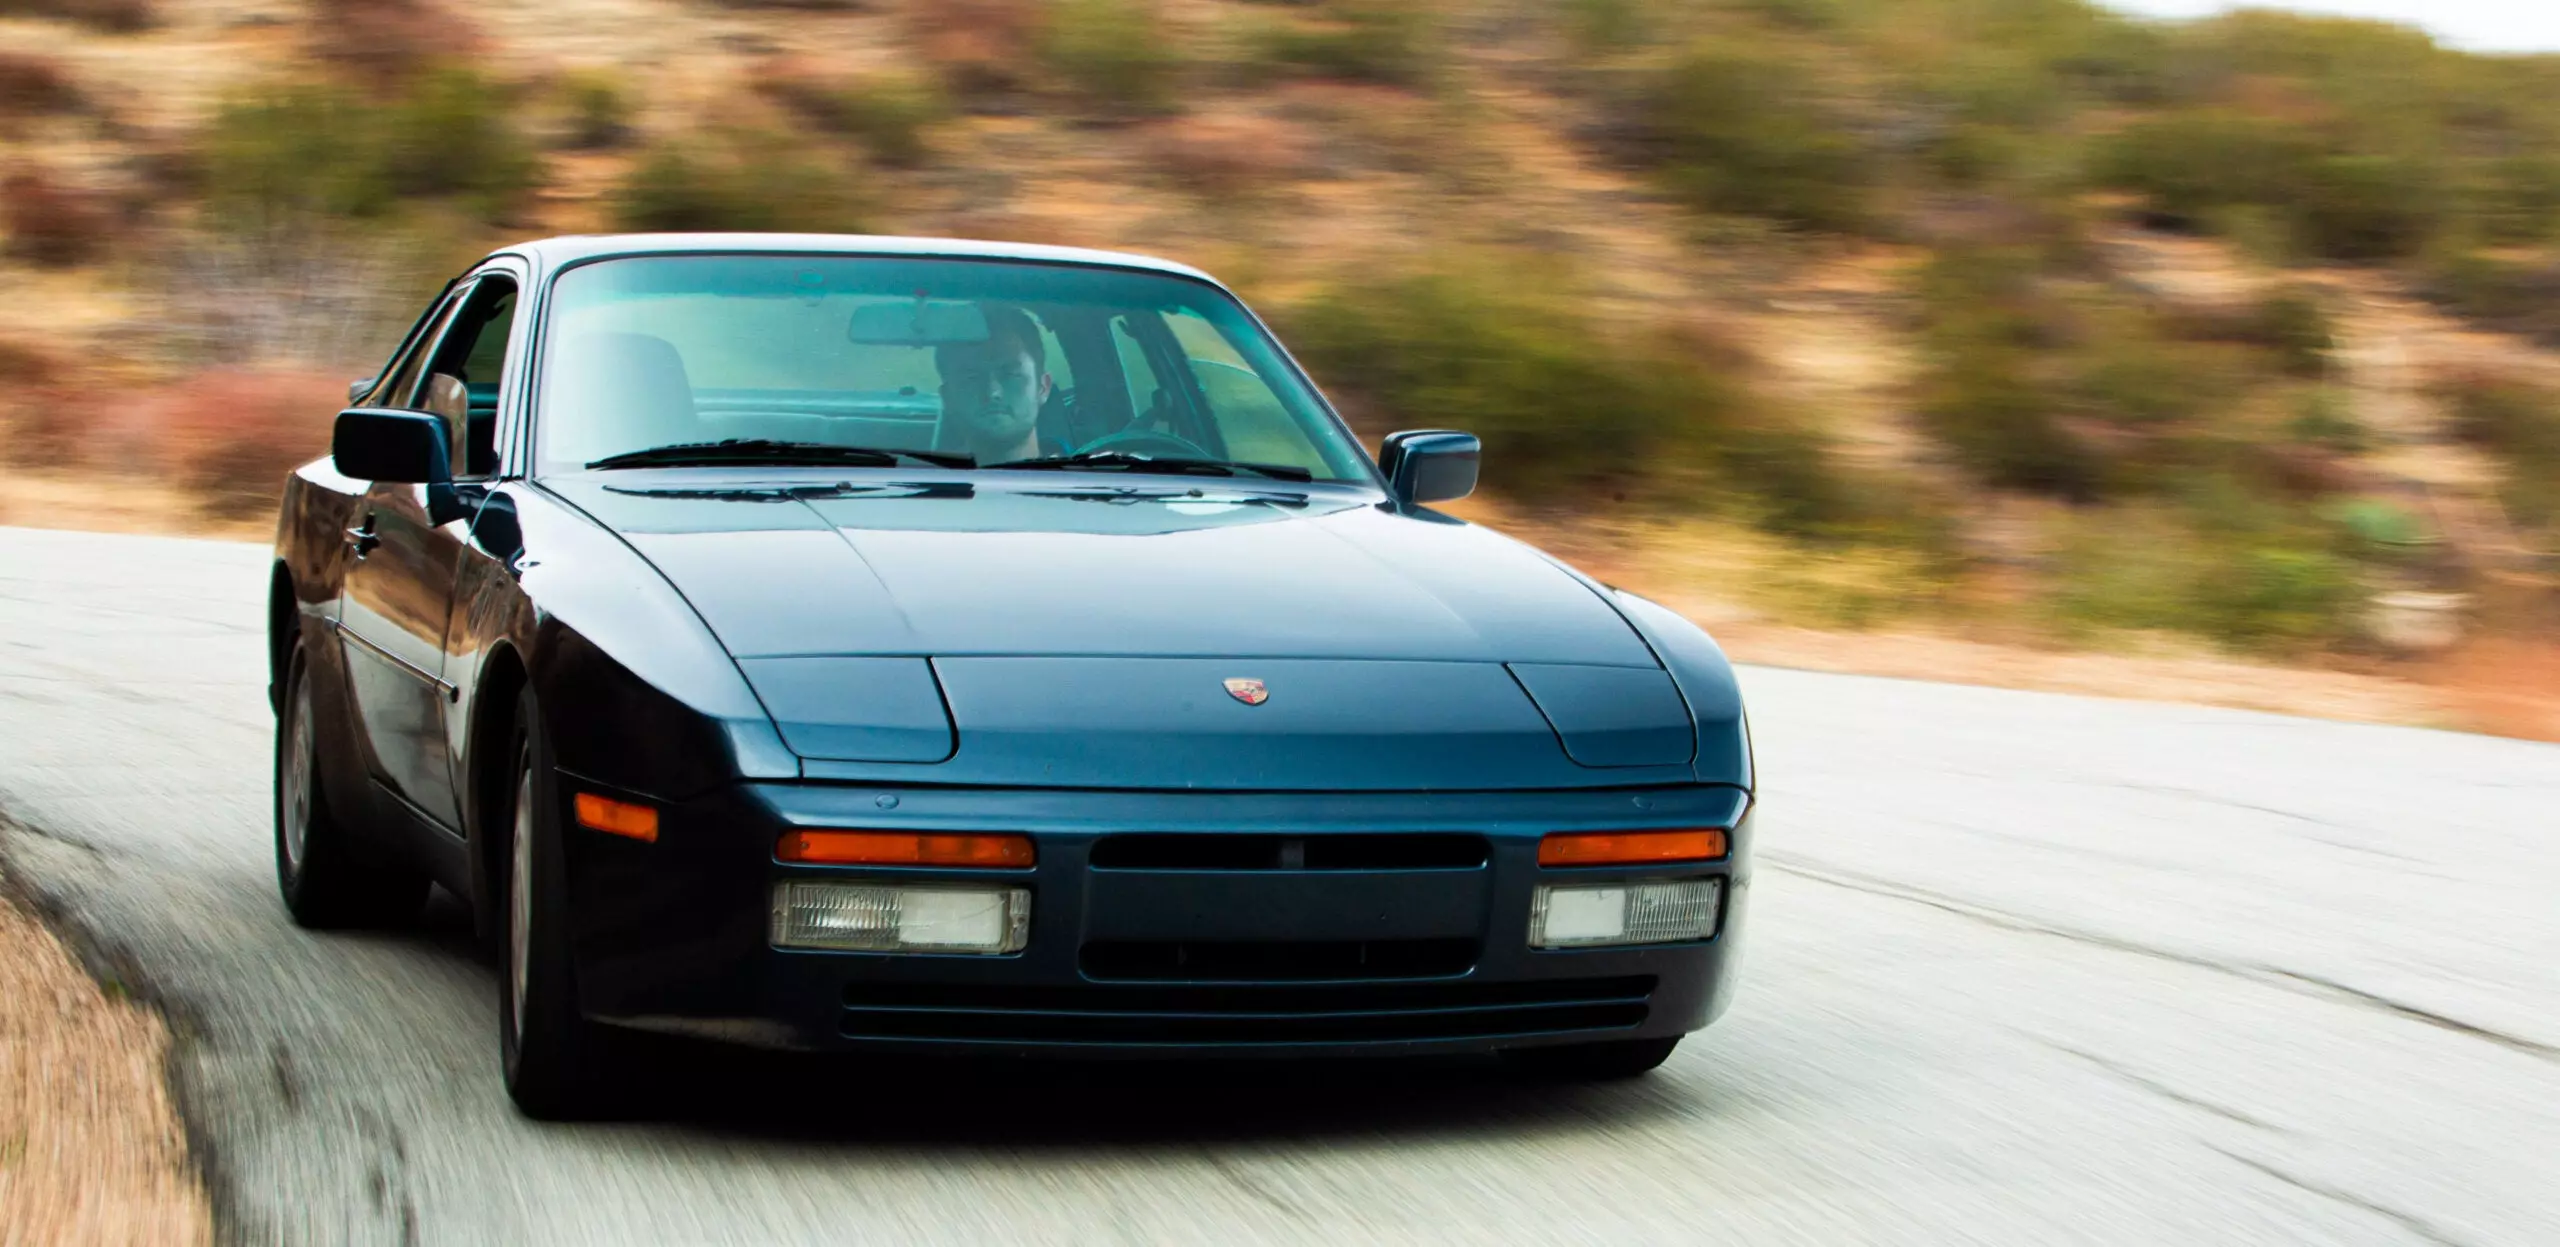 Getting Rollers of a Porsche 944 Turbo From My GTI